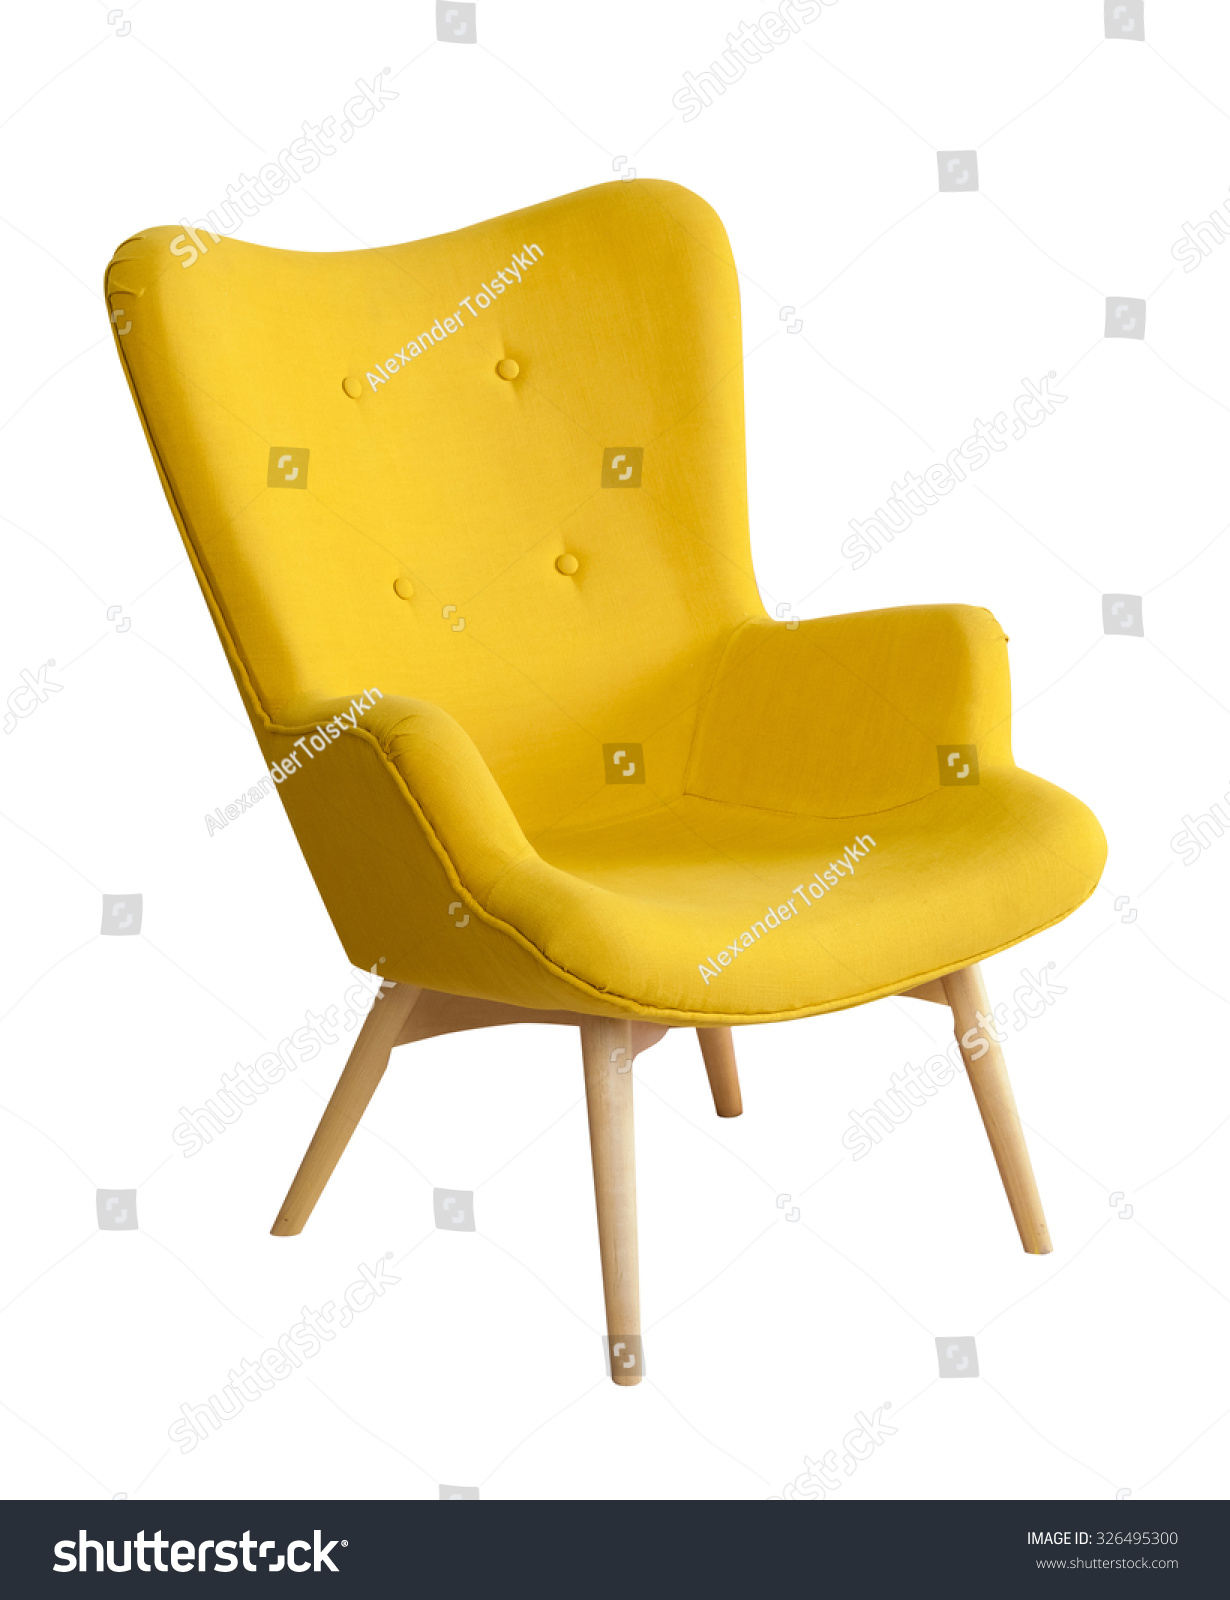 Yellow modern chair isolated on white background #326495300